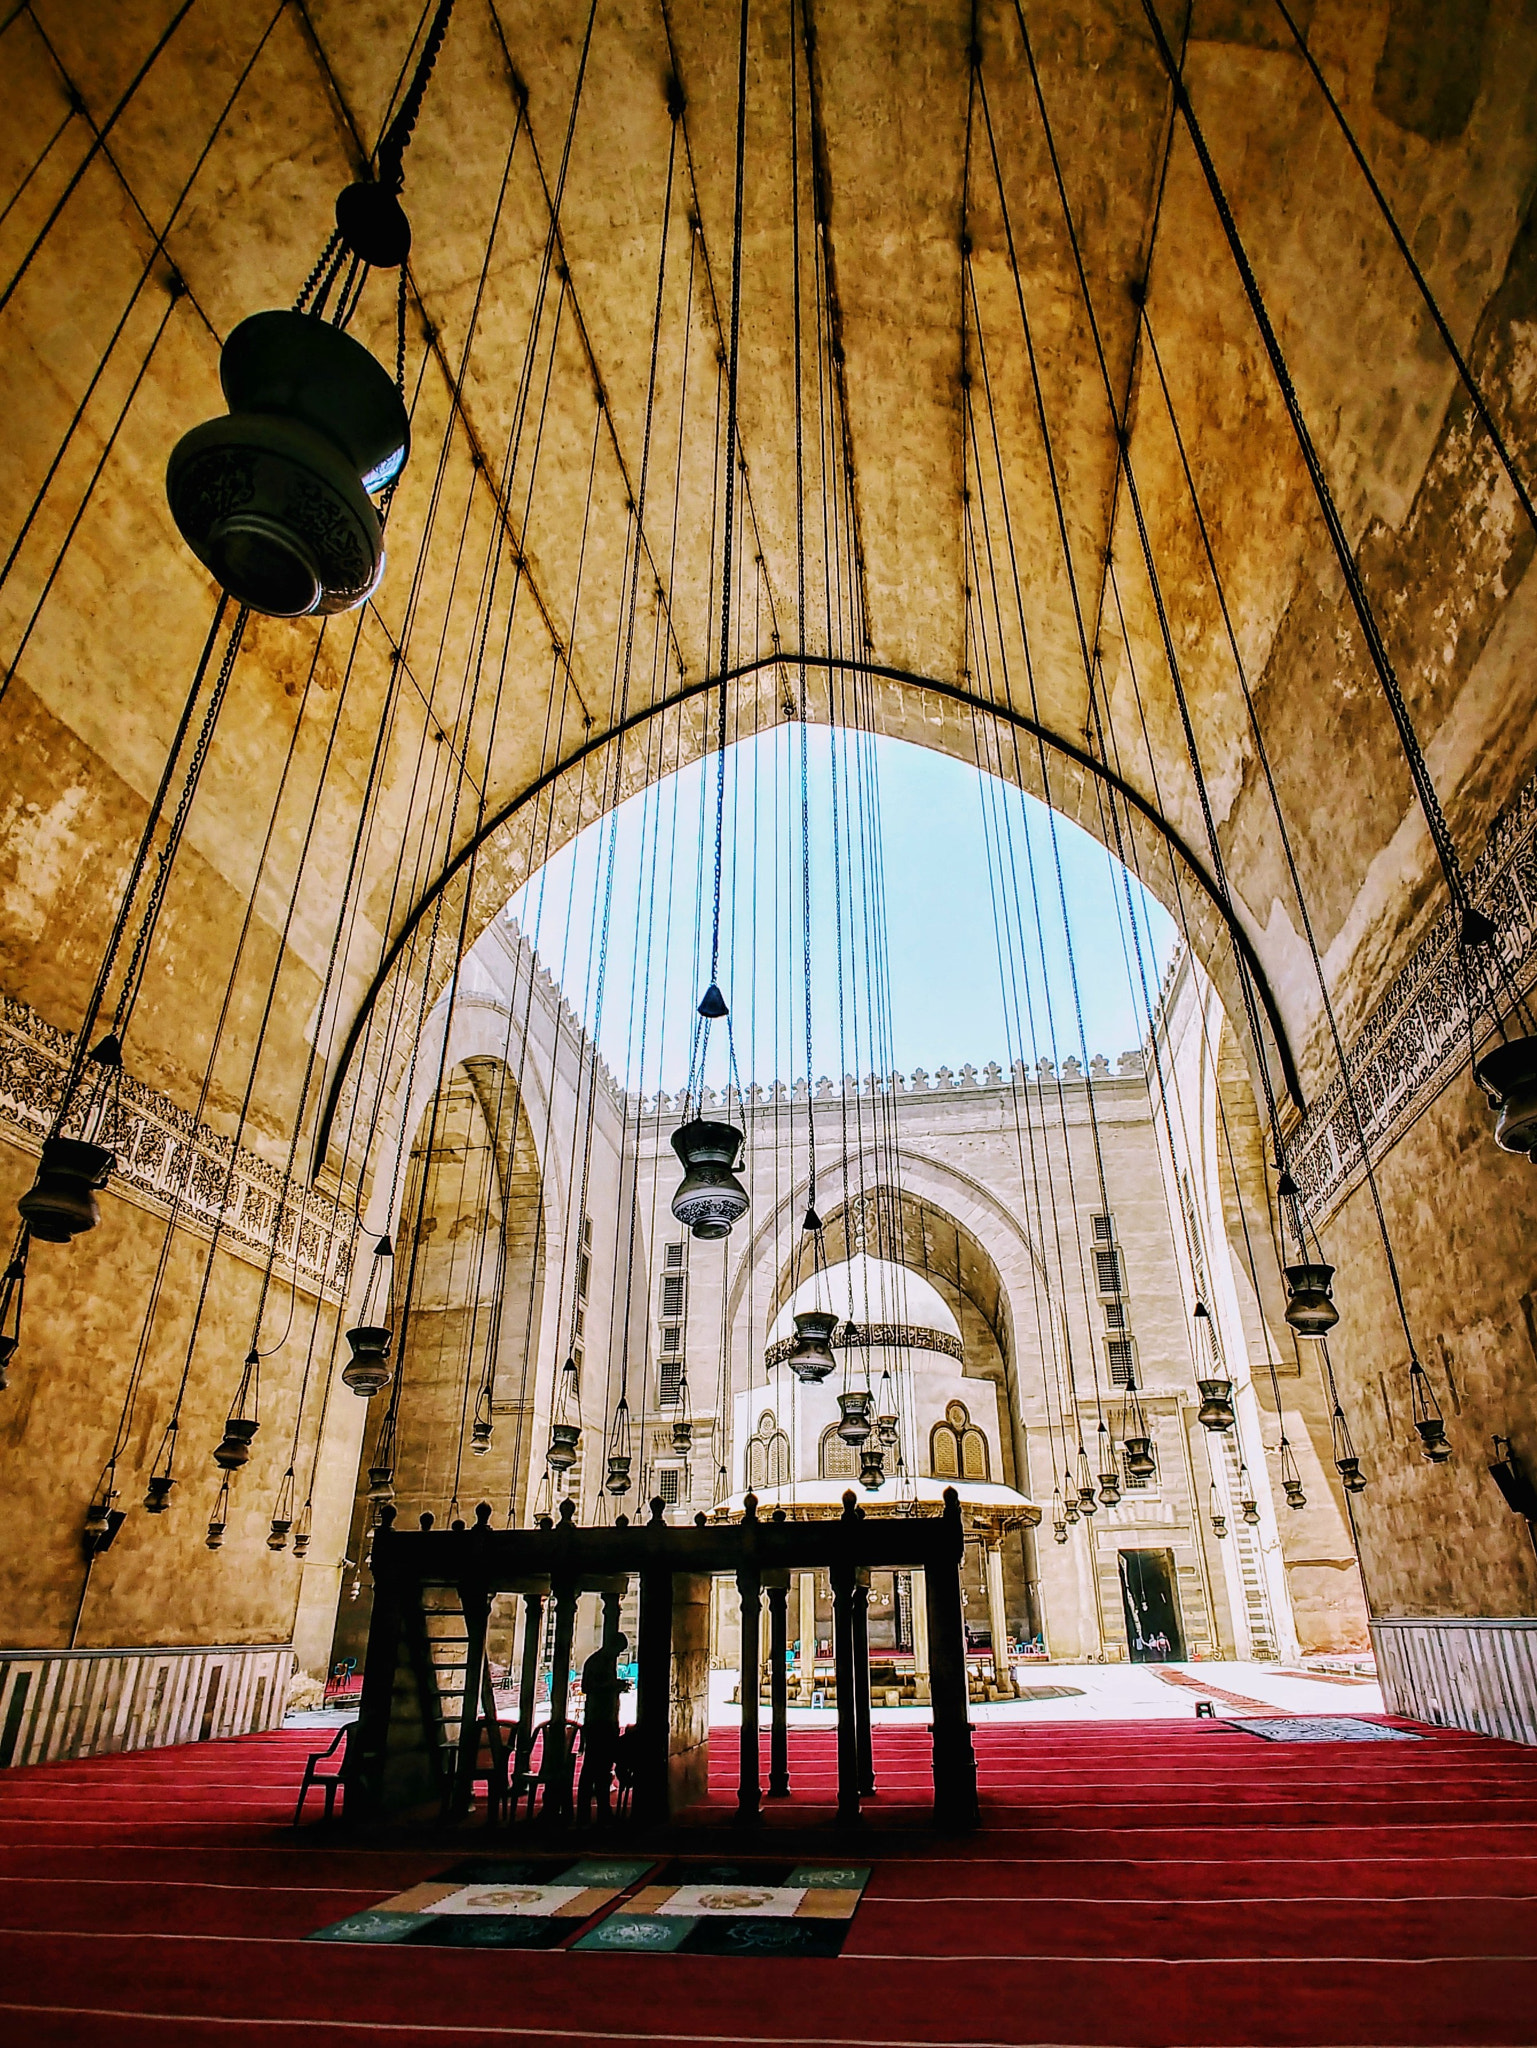 LG V30 sample photo. Sultan hassan mosque photography